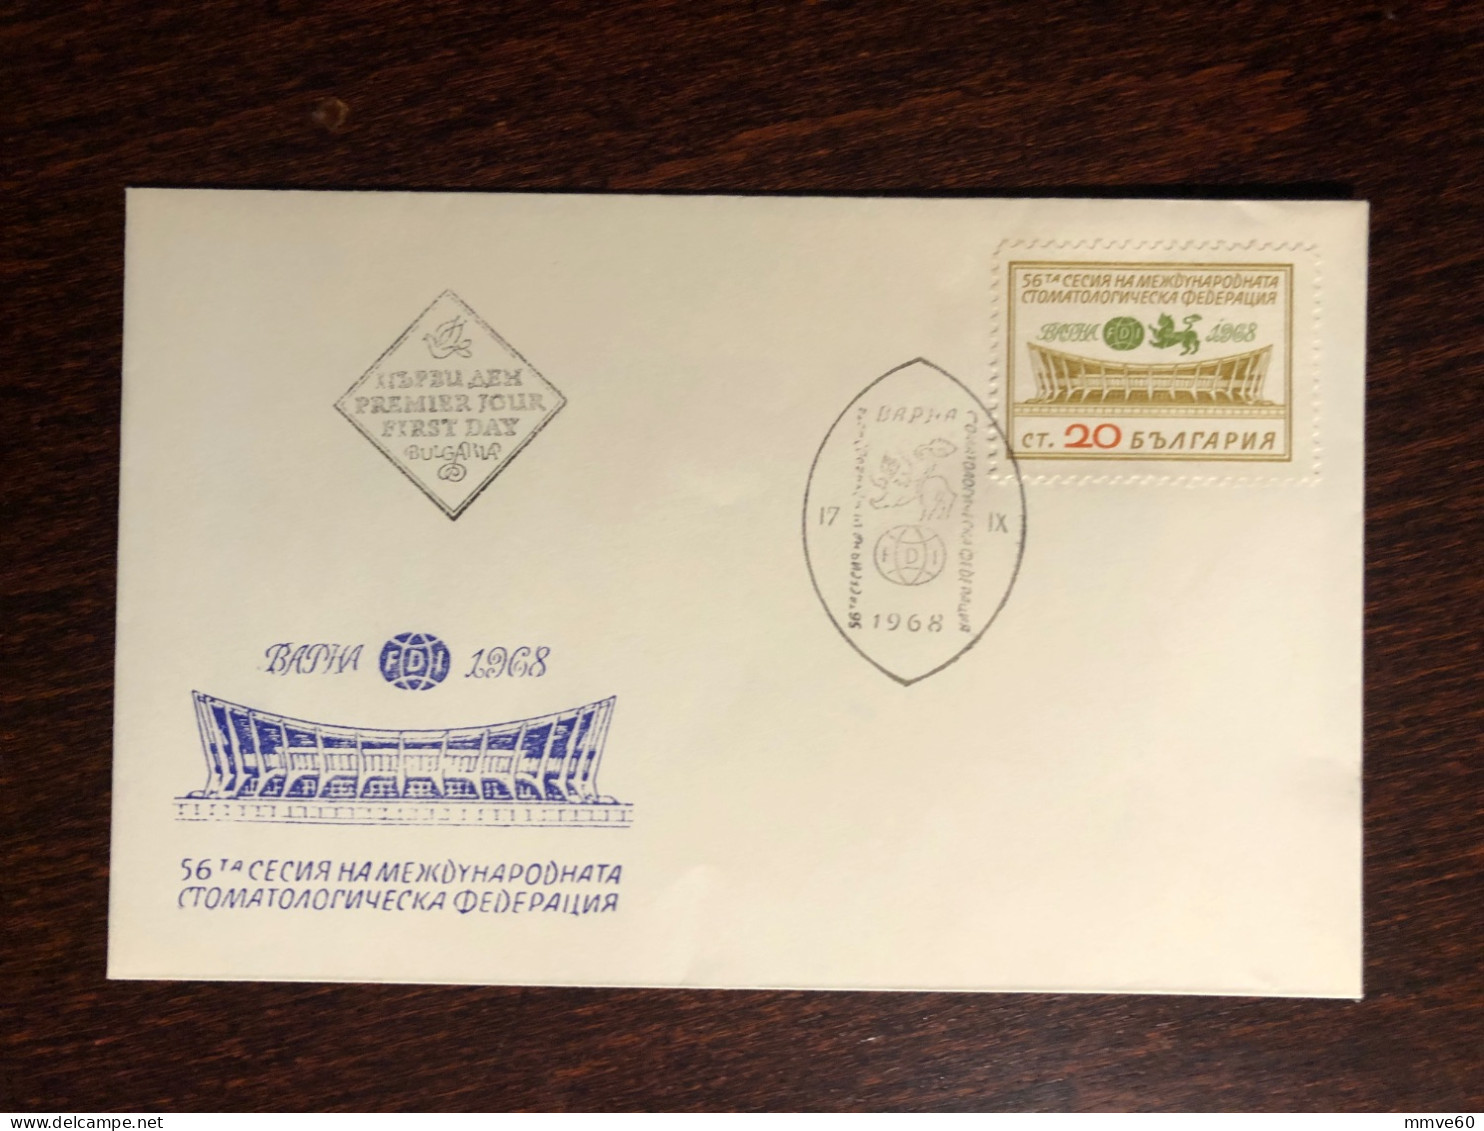 BULGARIA FDC COVER 1968 YEAR DENTAL DENTISTRY HEALTH MEDICINE STAMP - Lettres & Documents